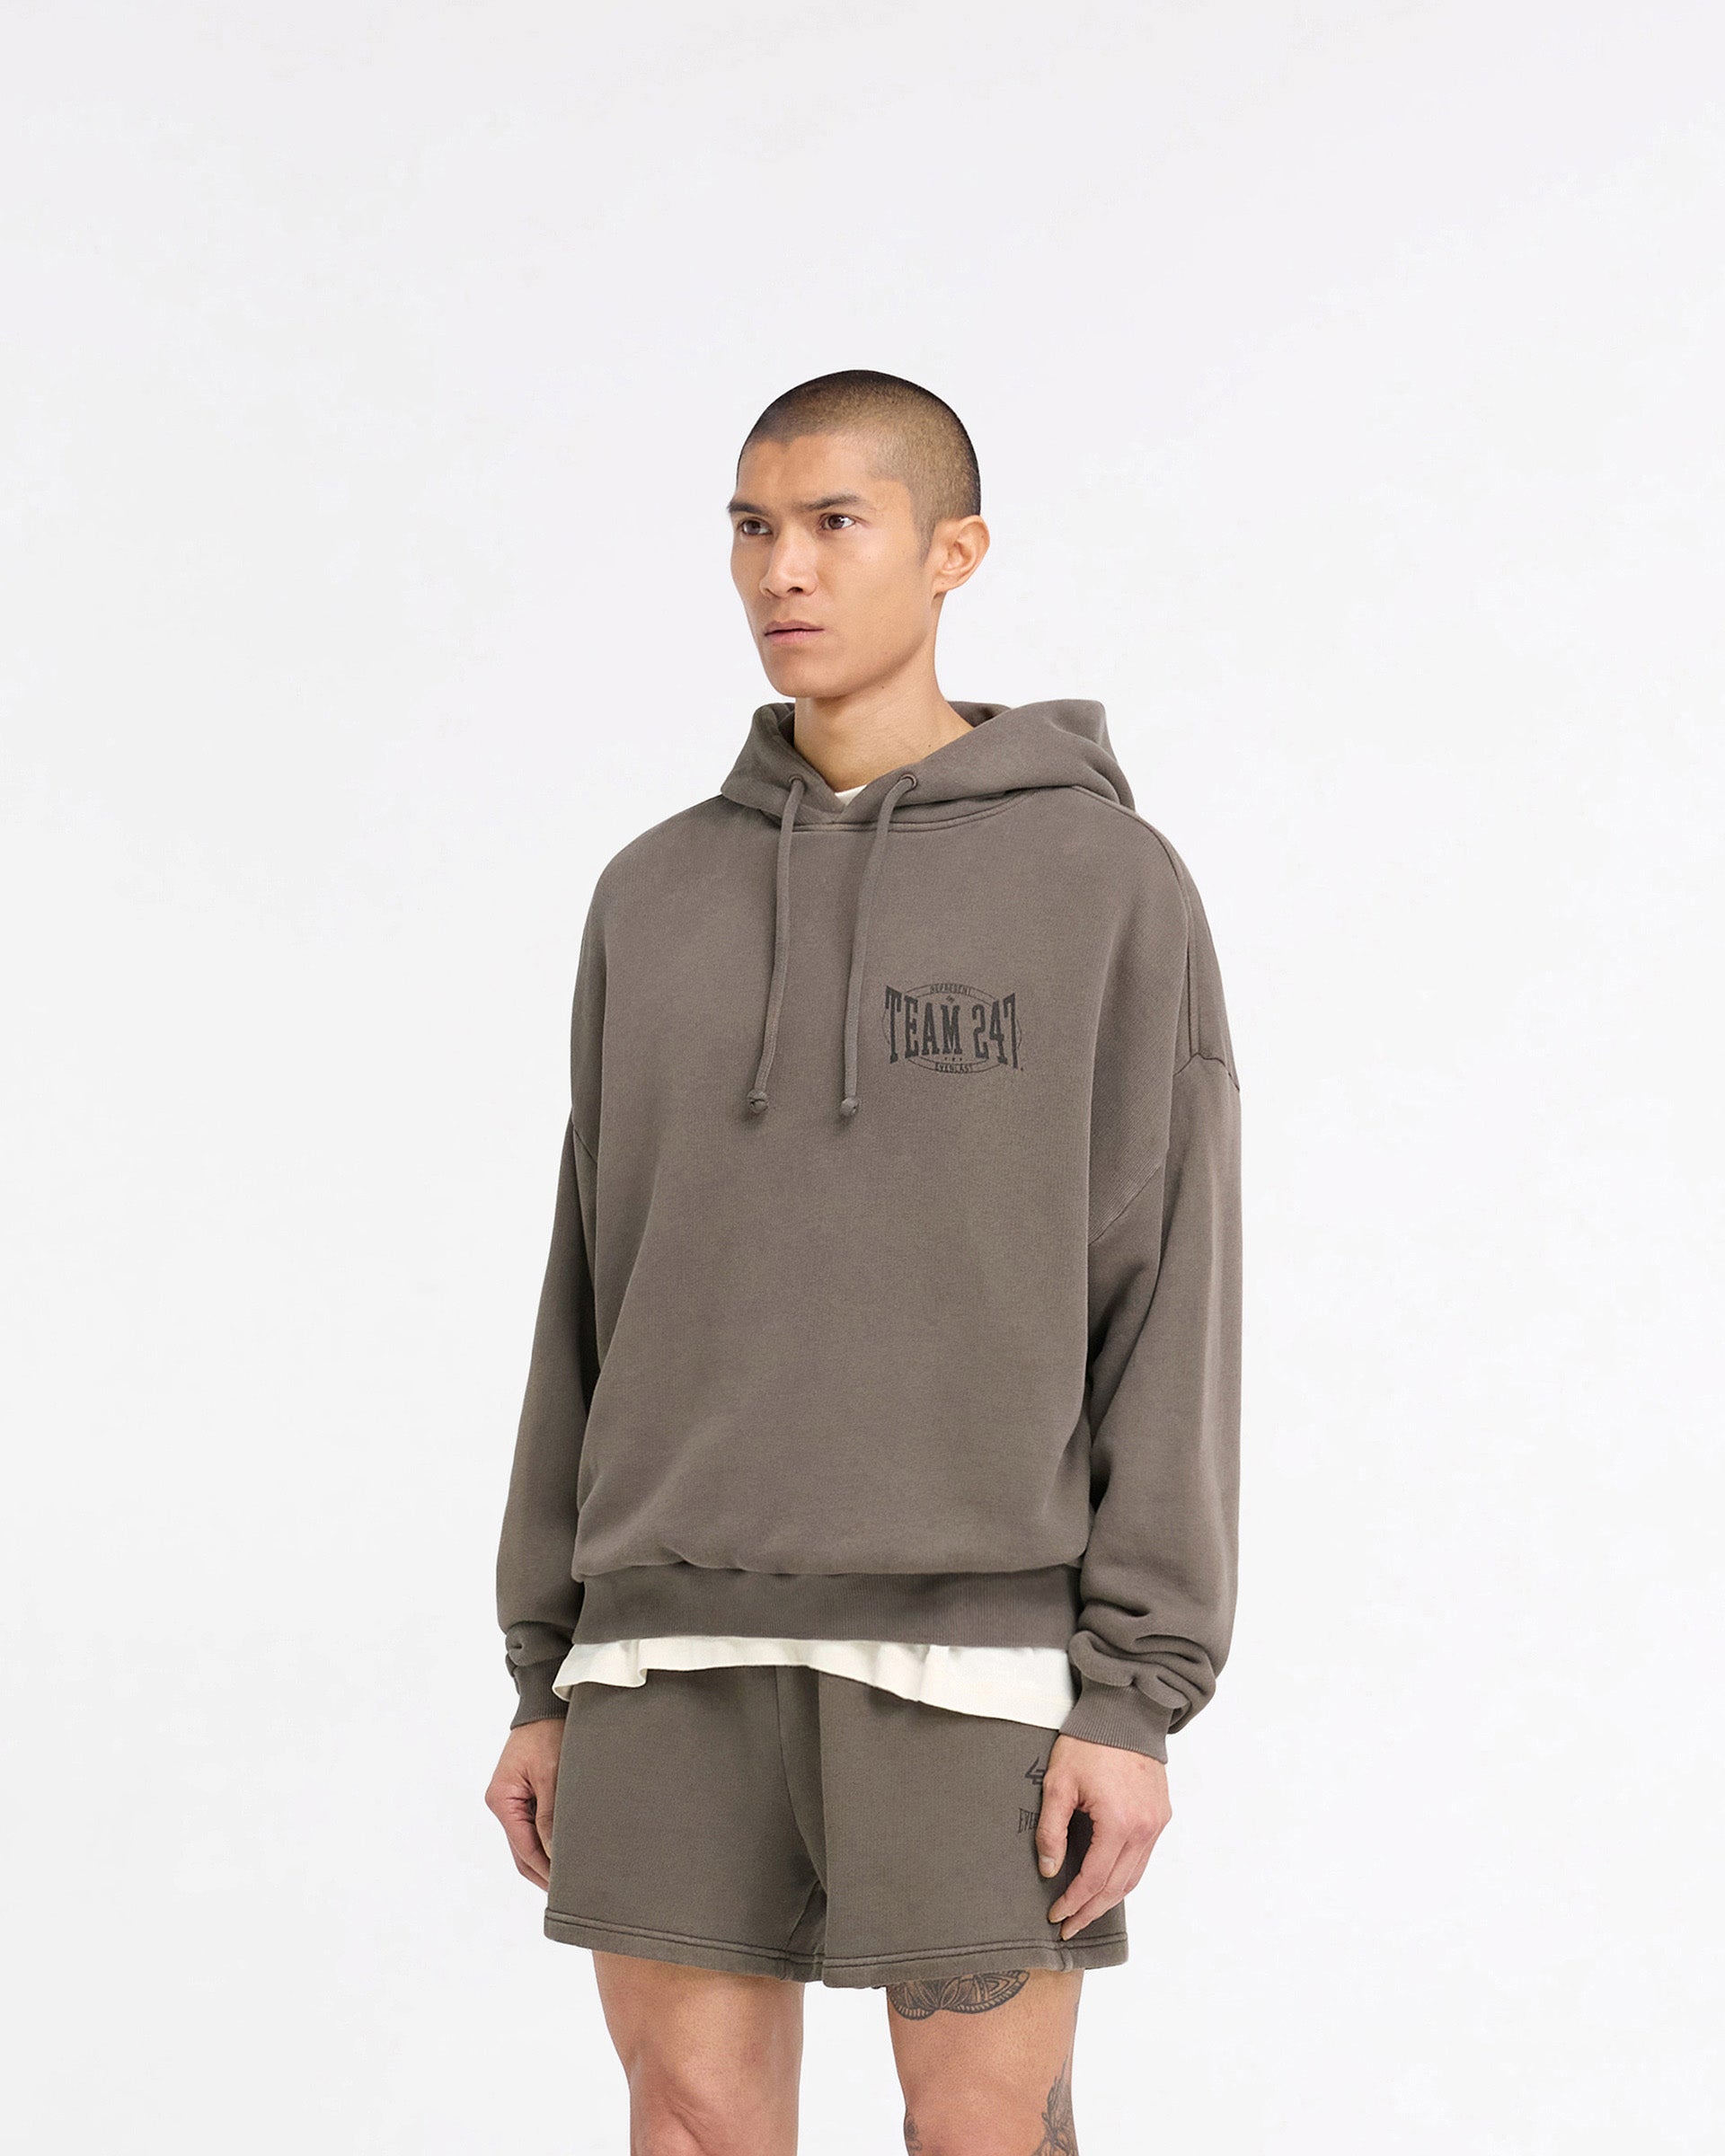 247 X Everlast Training Camp Boxy Hoodie - Washed Brown